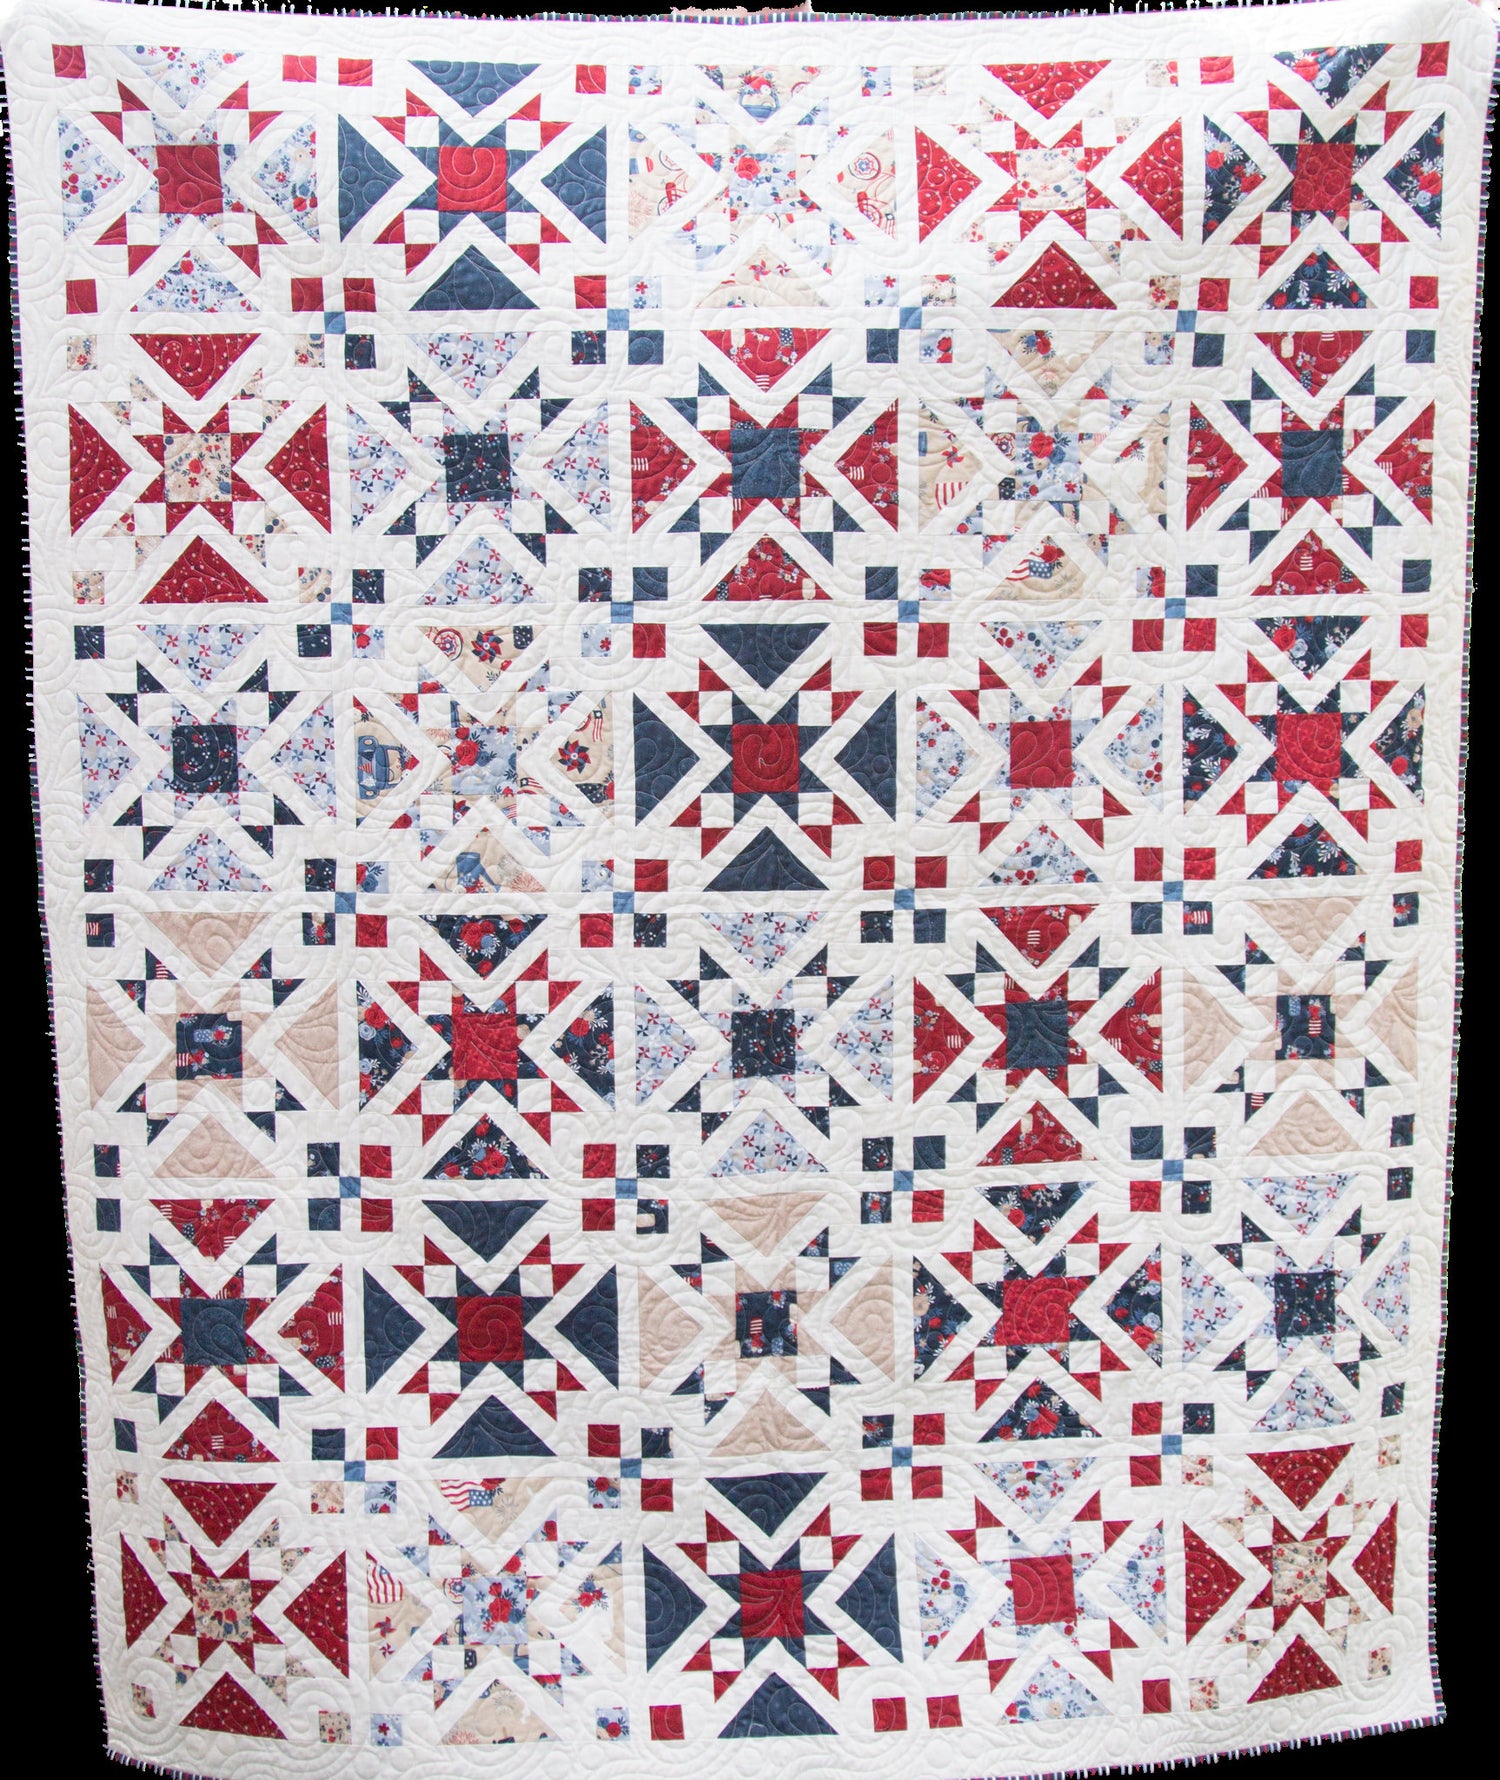 Confetti Stars Quilt Kit - Pattern by Wendy Shepherd - fabric kit and quilt pattern